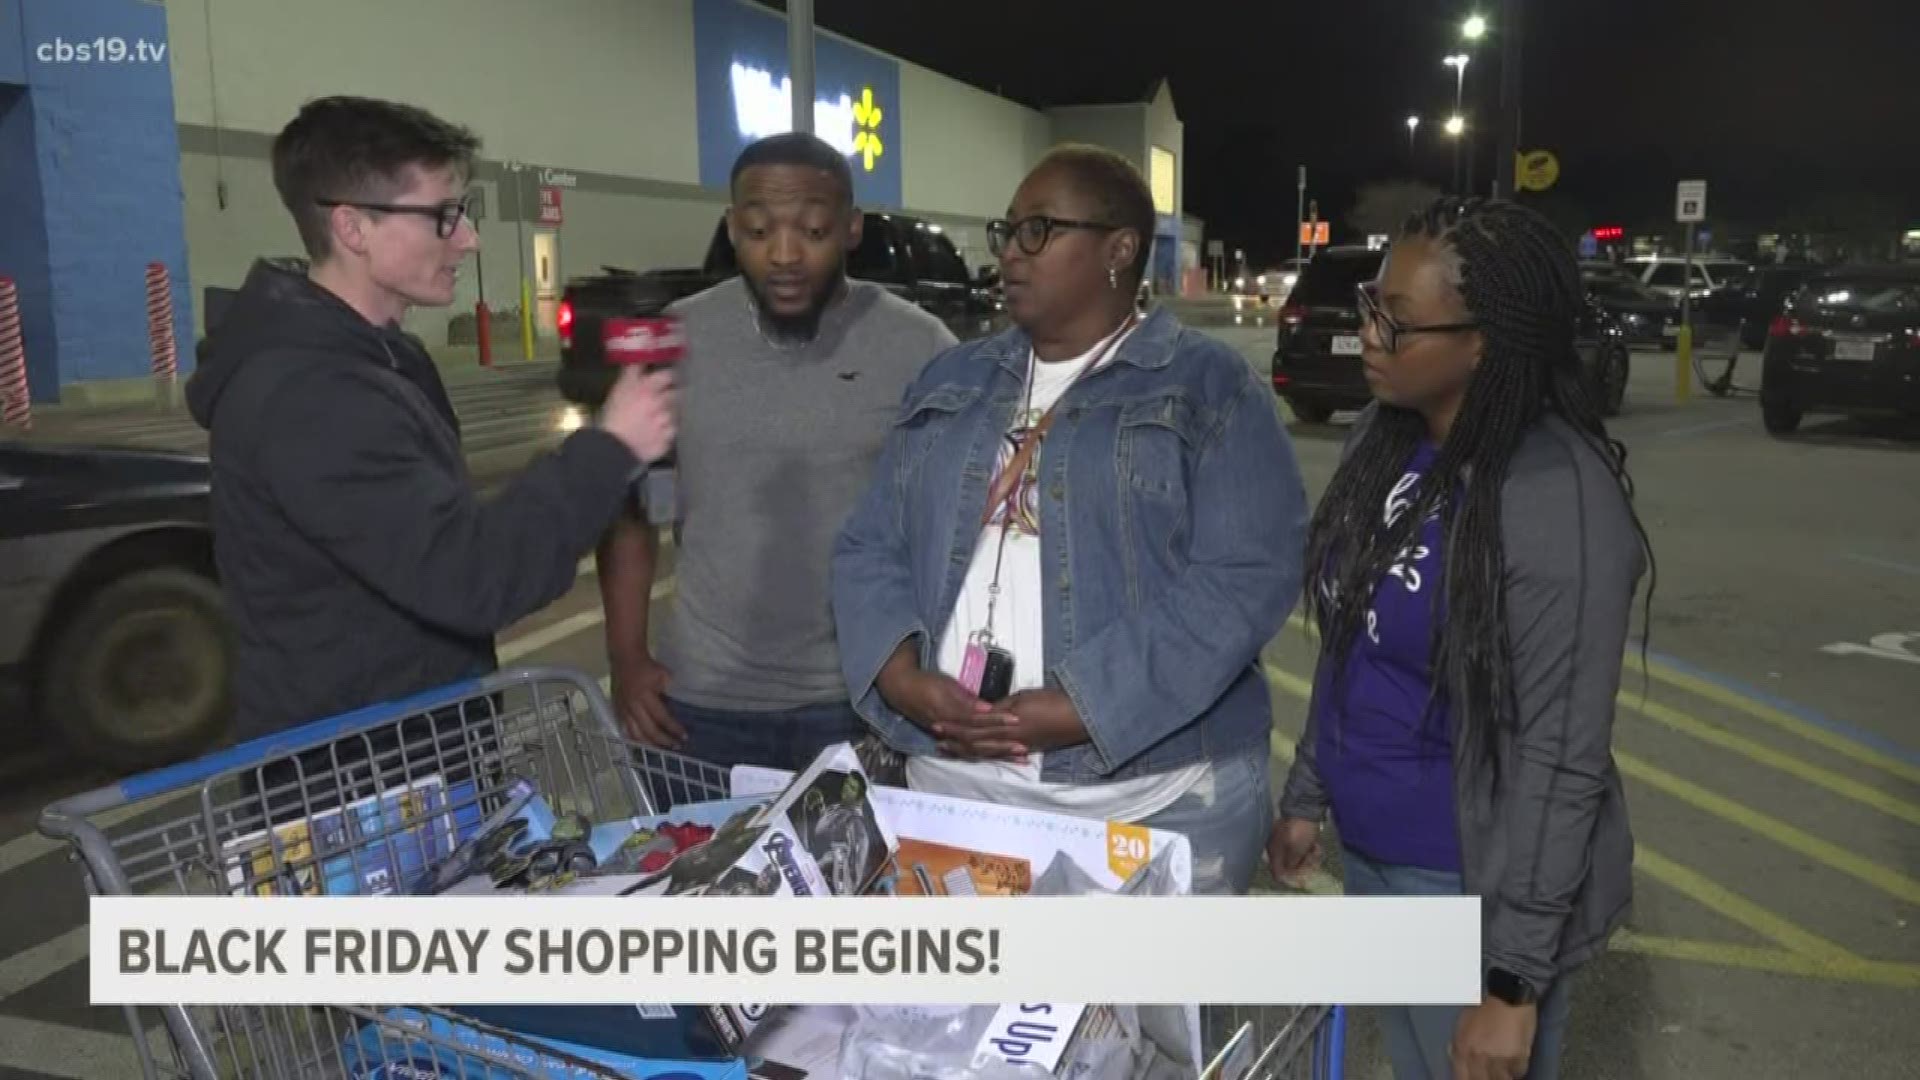 East Texas consumers were quick out the door following Thanksgiving dinner to find the best Black Friday deals.